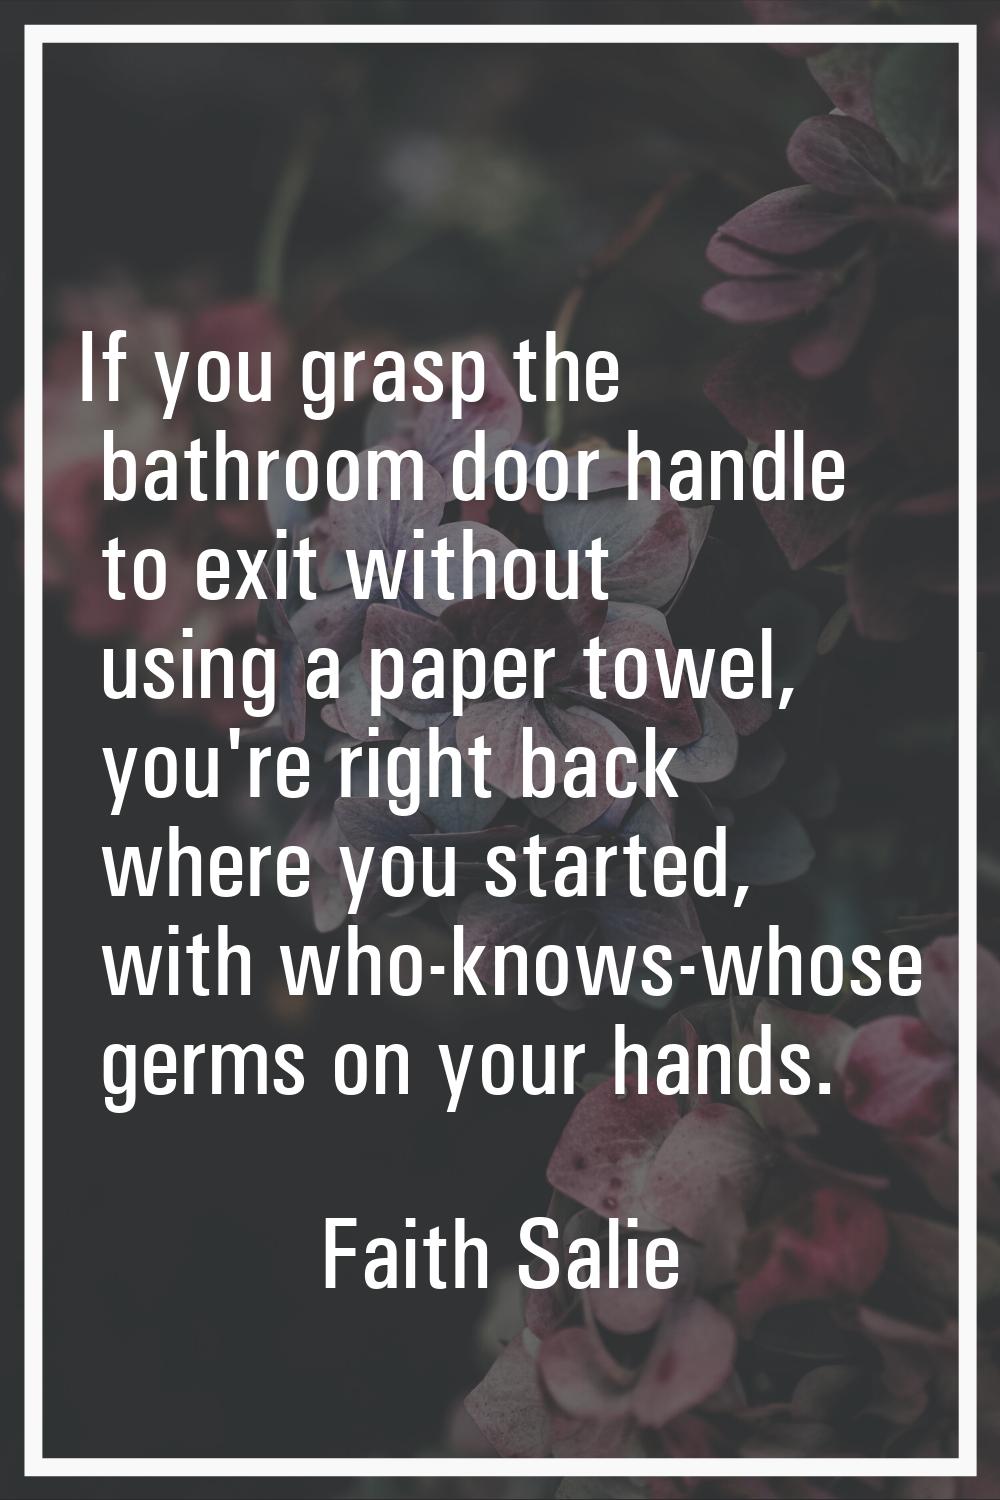 If you grasp the bathroom door handle to exit without using a paper towel, you're right back where 